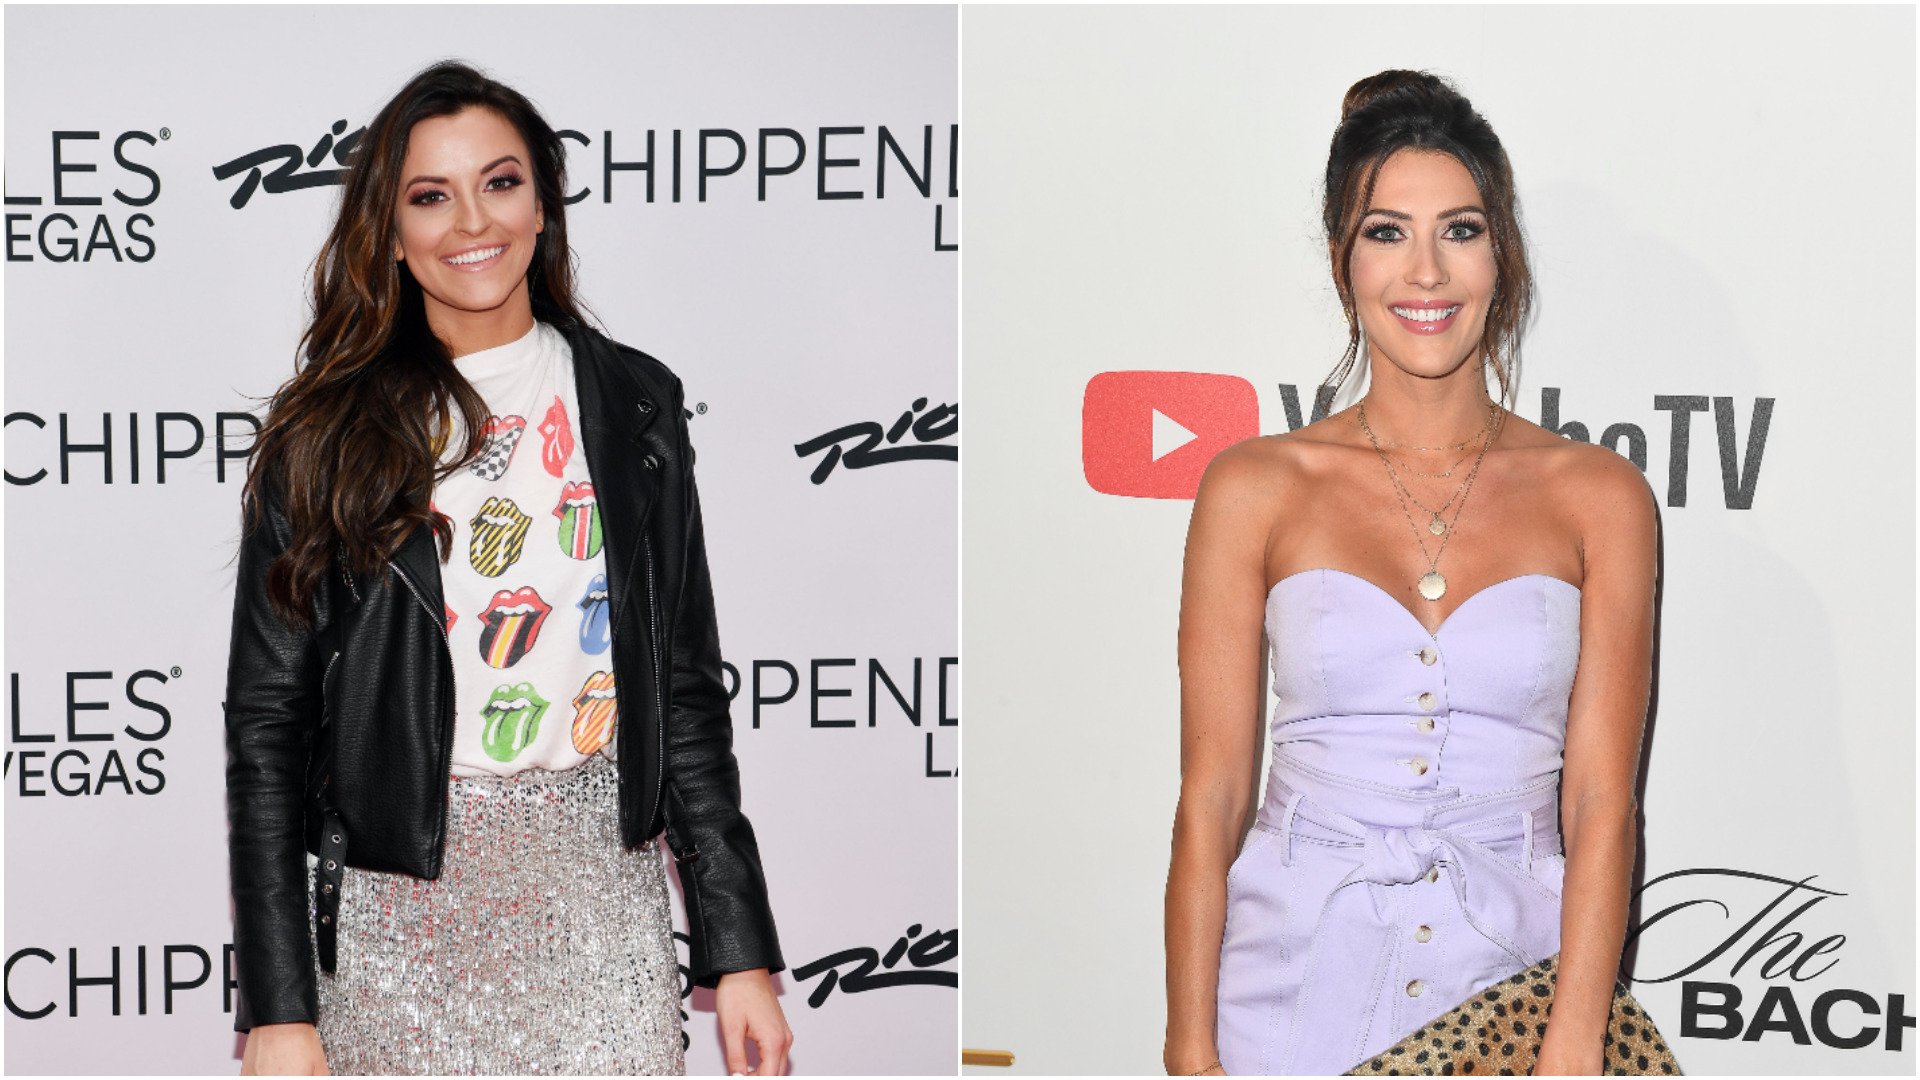 Read carpet photos of Becca Kufrin and Tia Booth from ‘Bachelor in Paradise’ Season 7 in 2021